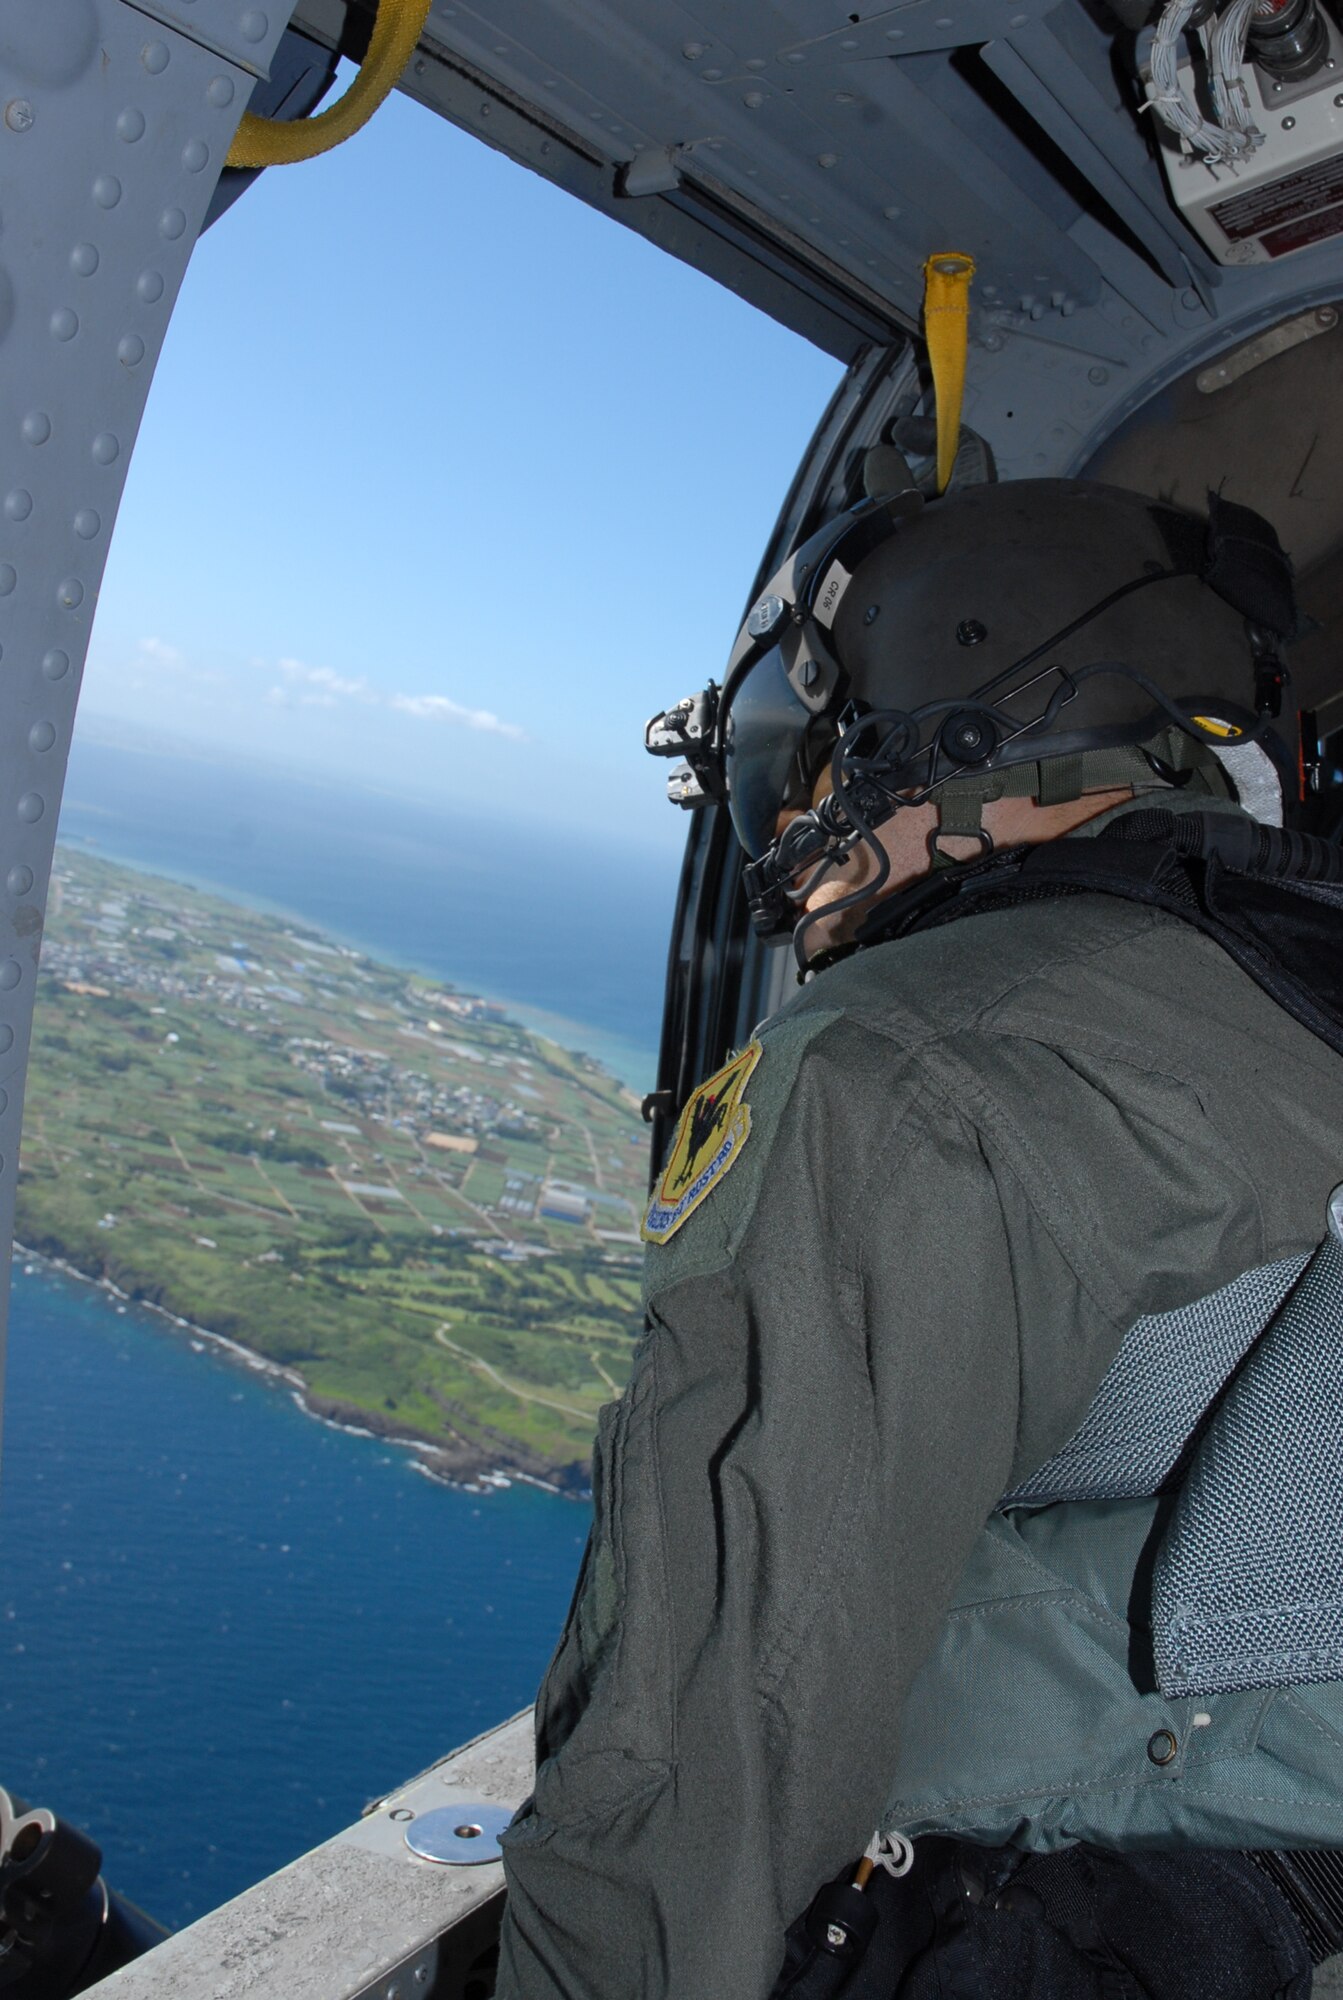 Staff Sgt. Justin Schramm, an aerial gunner assigned to the 33rd Rescue Squadron scans the sky and water below from an HH-60 prior to a crisis management exercise  off the coast of Okinawa Oct. 8, 2008. Members of the 18th Wing and Japanese Coast Guard rehearsed response procedures for a simulated over the water aircraft accident. (U.S. Air Force photo/Staff Sgt. Chrissy Best)